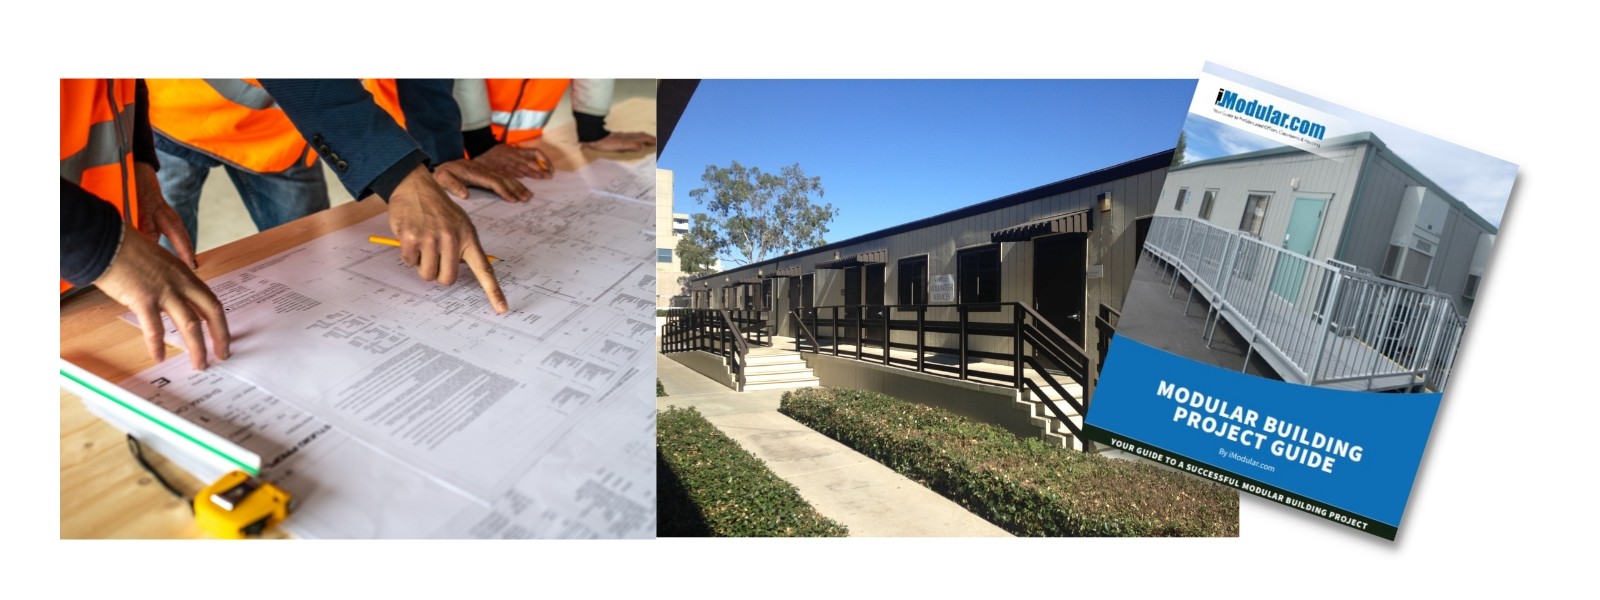 Free Planning Guide for preparing to rent or buy a modular building